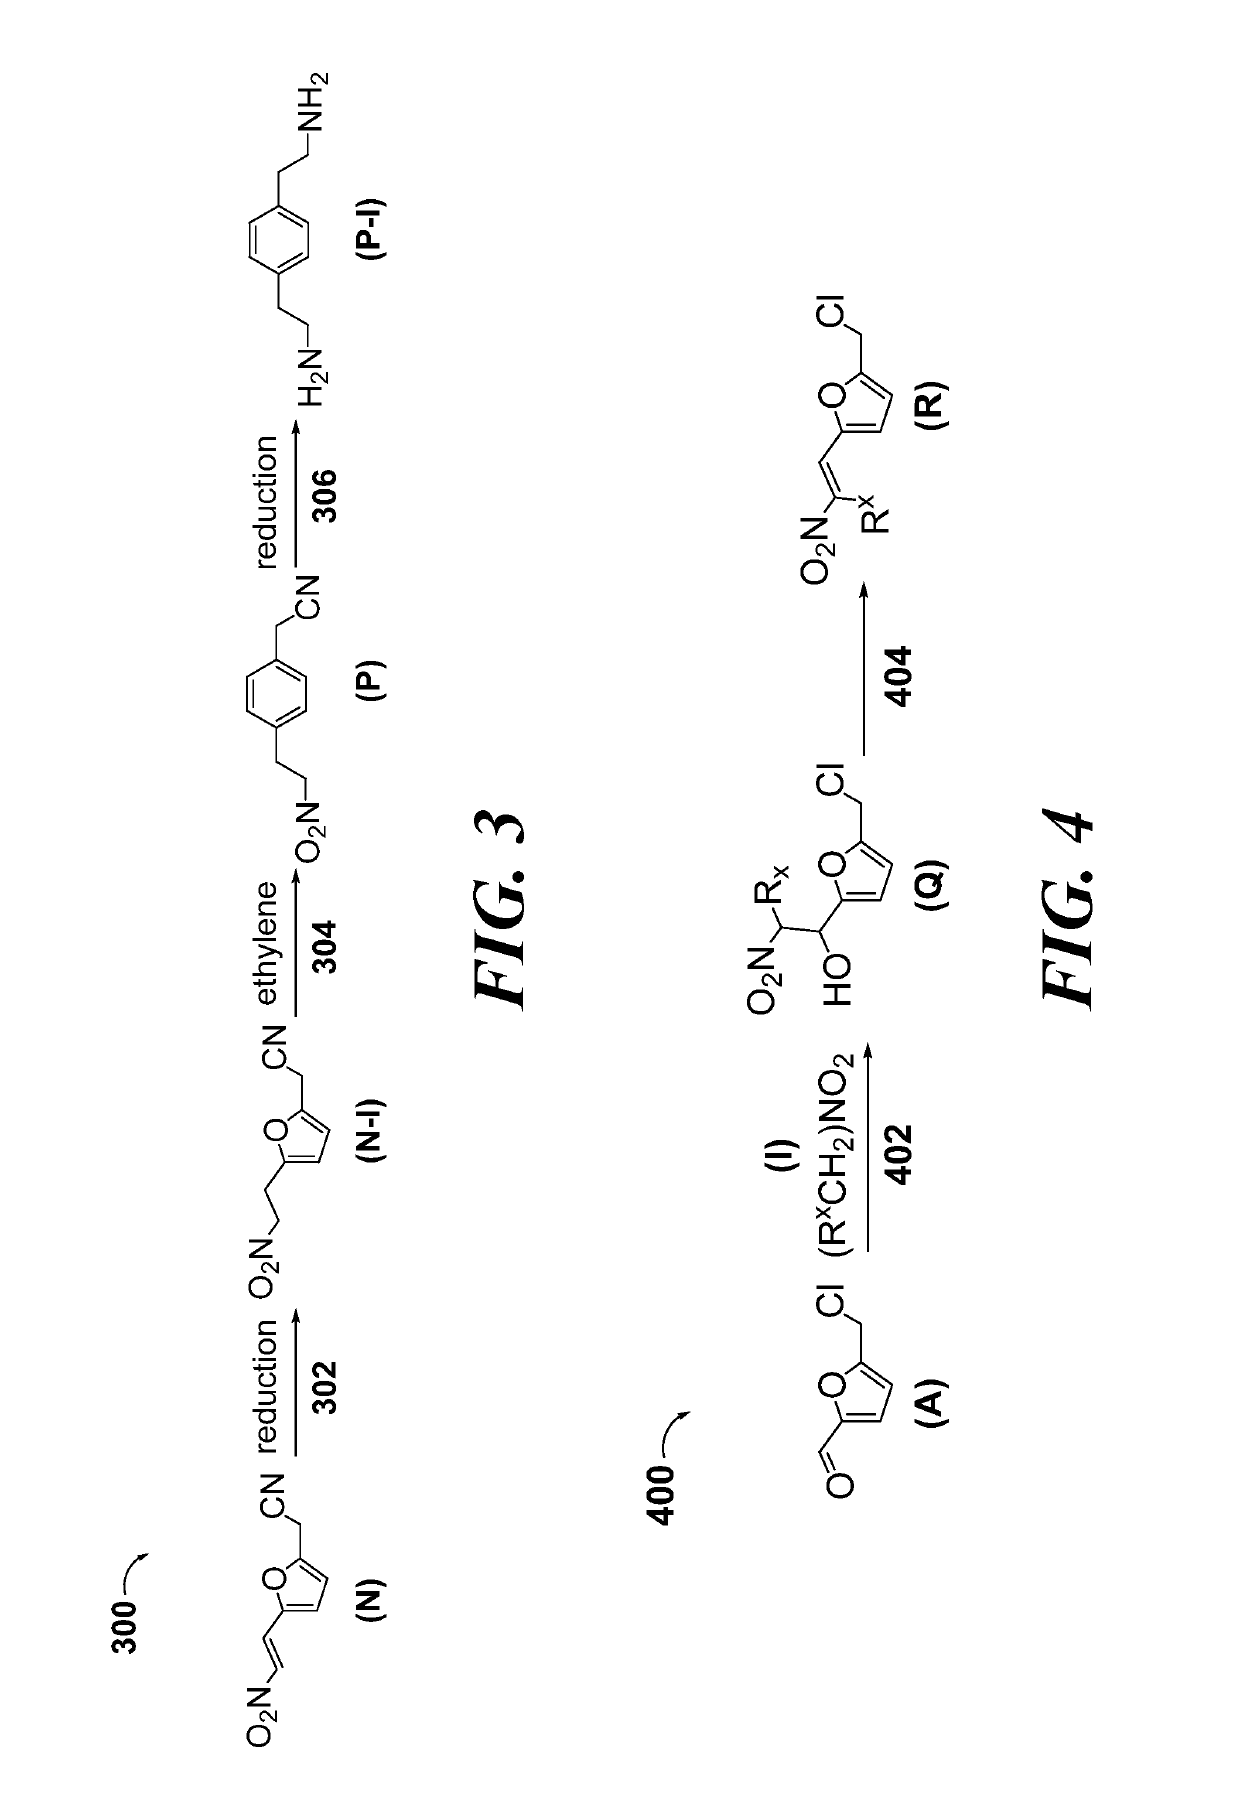 Diamine compounds, dinitro compounds and other compounds, and methods of producing thereof and uses related thereof